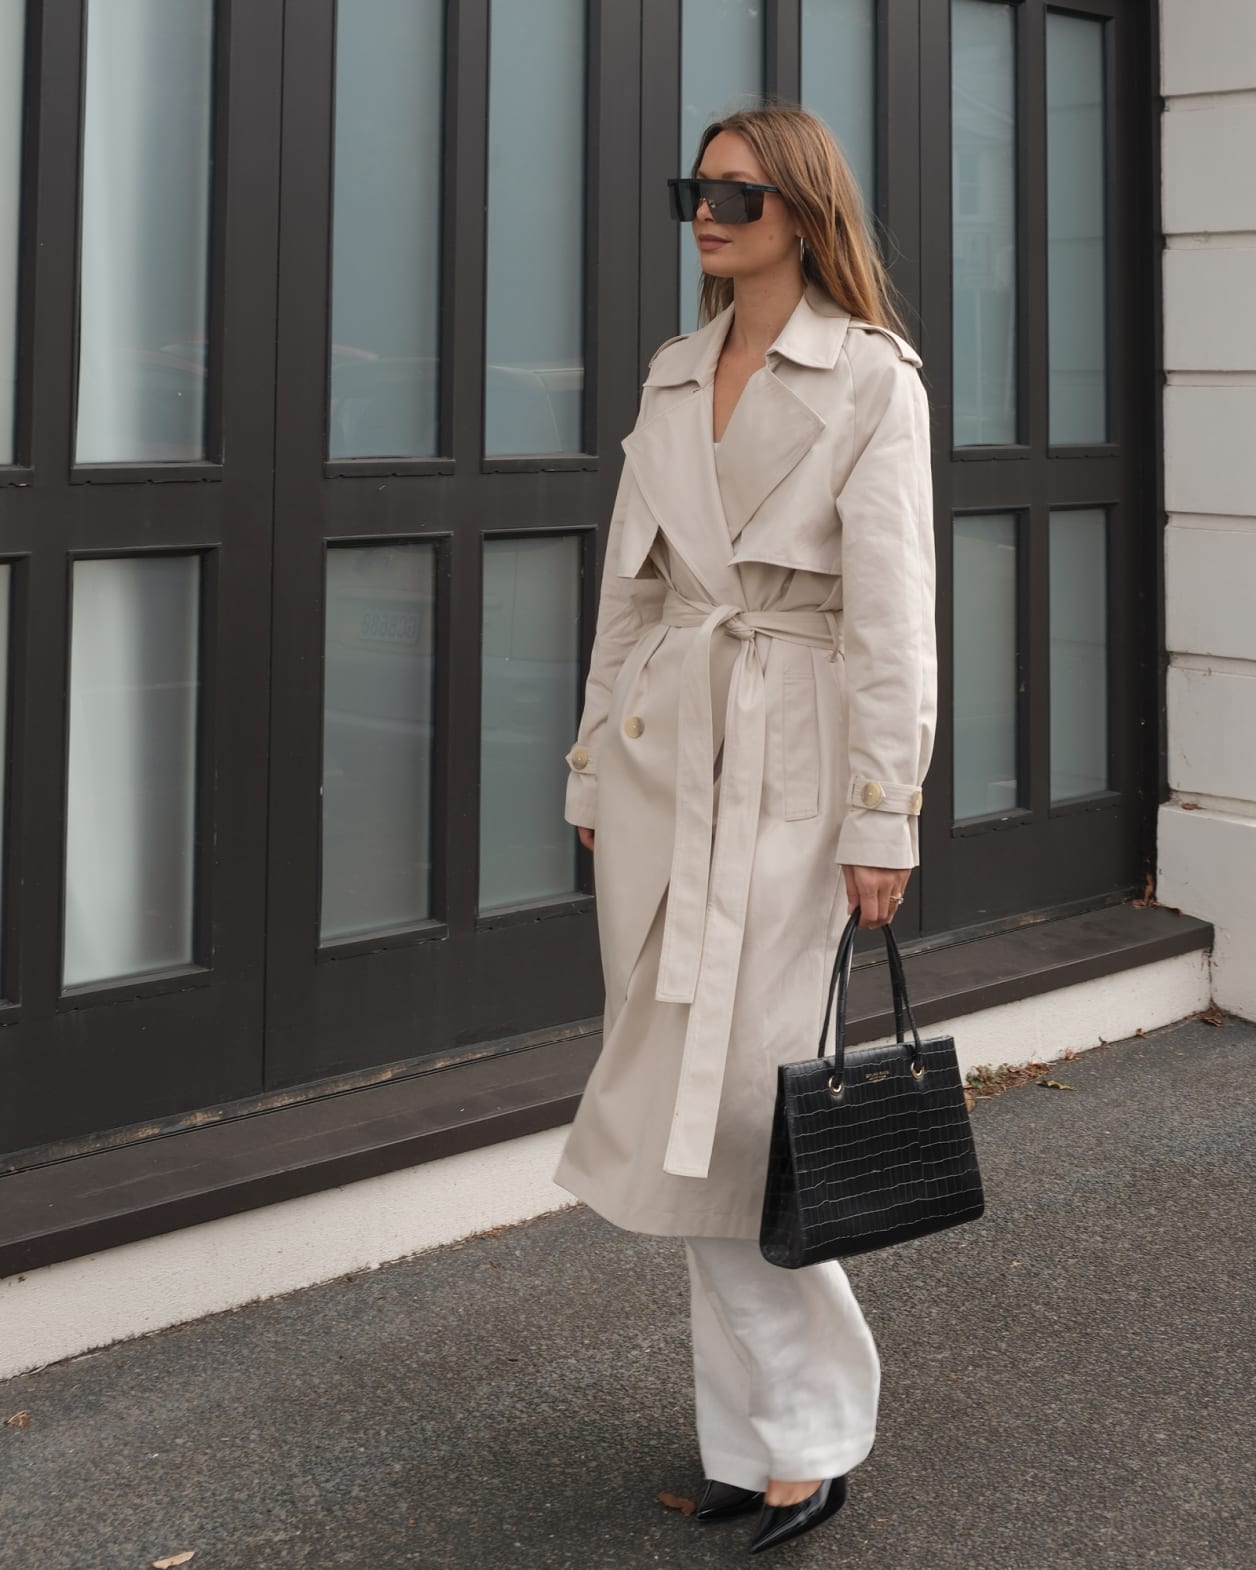 Layla Trench Coat in NATURAL